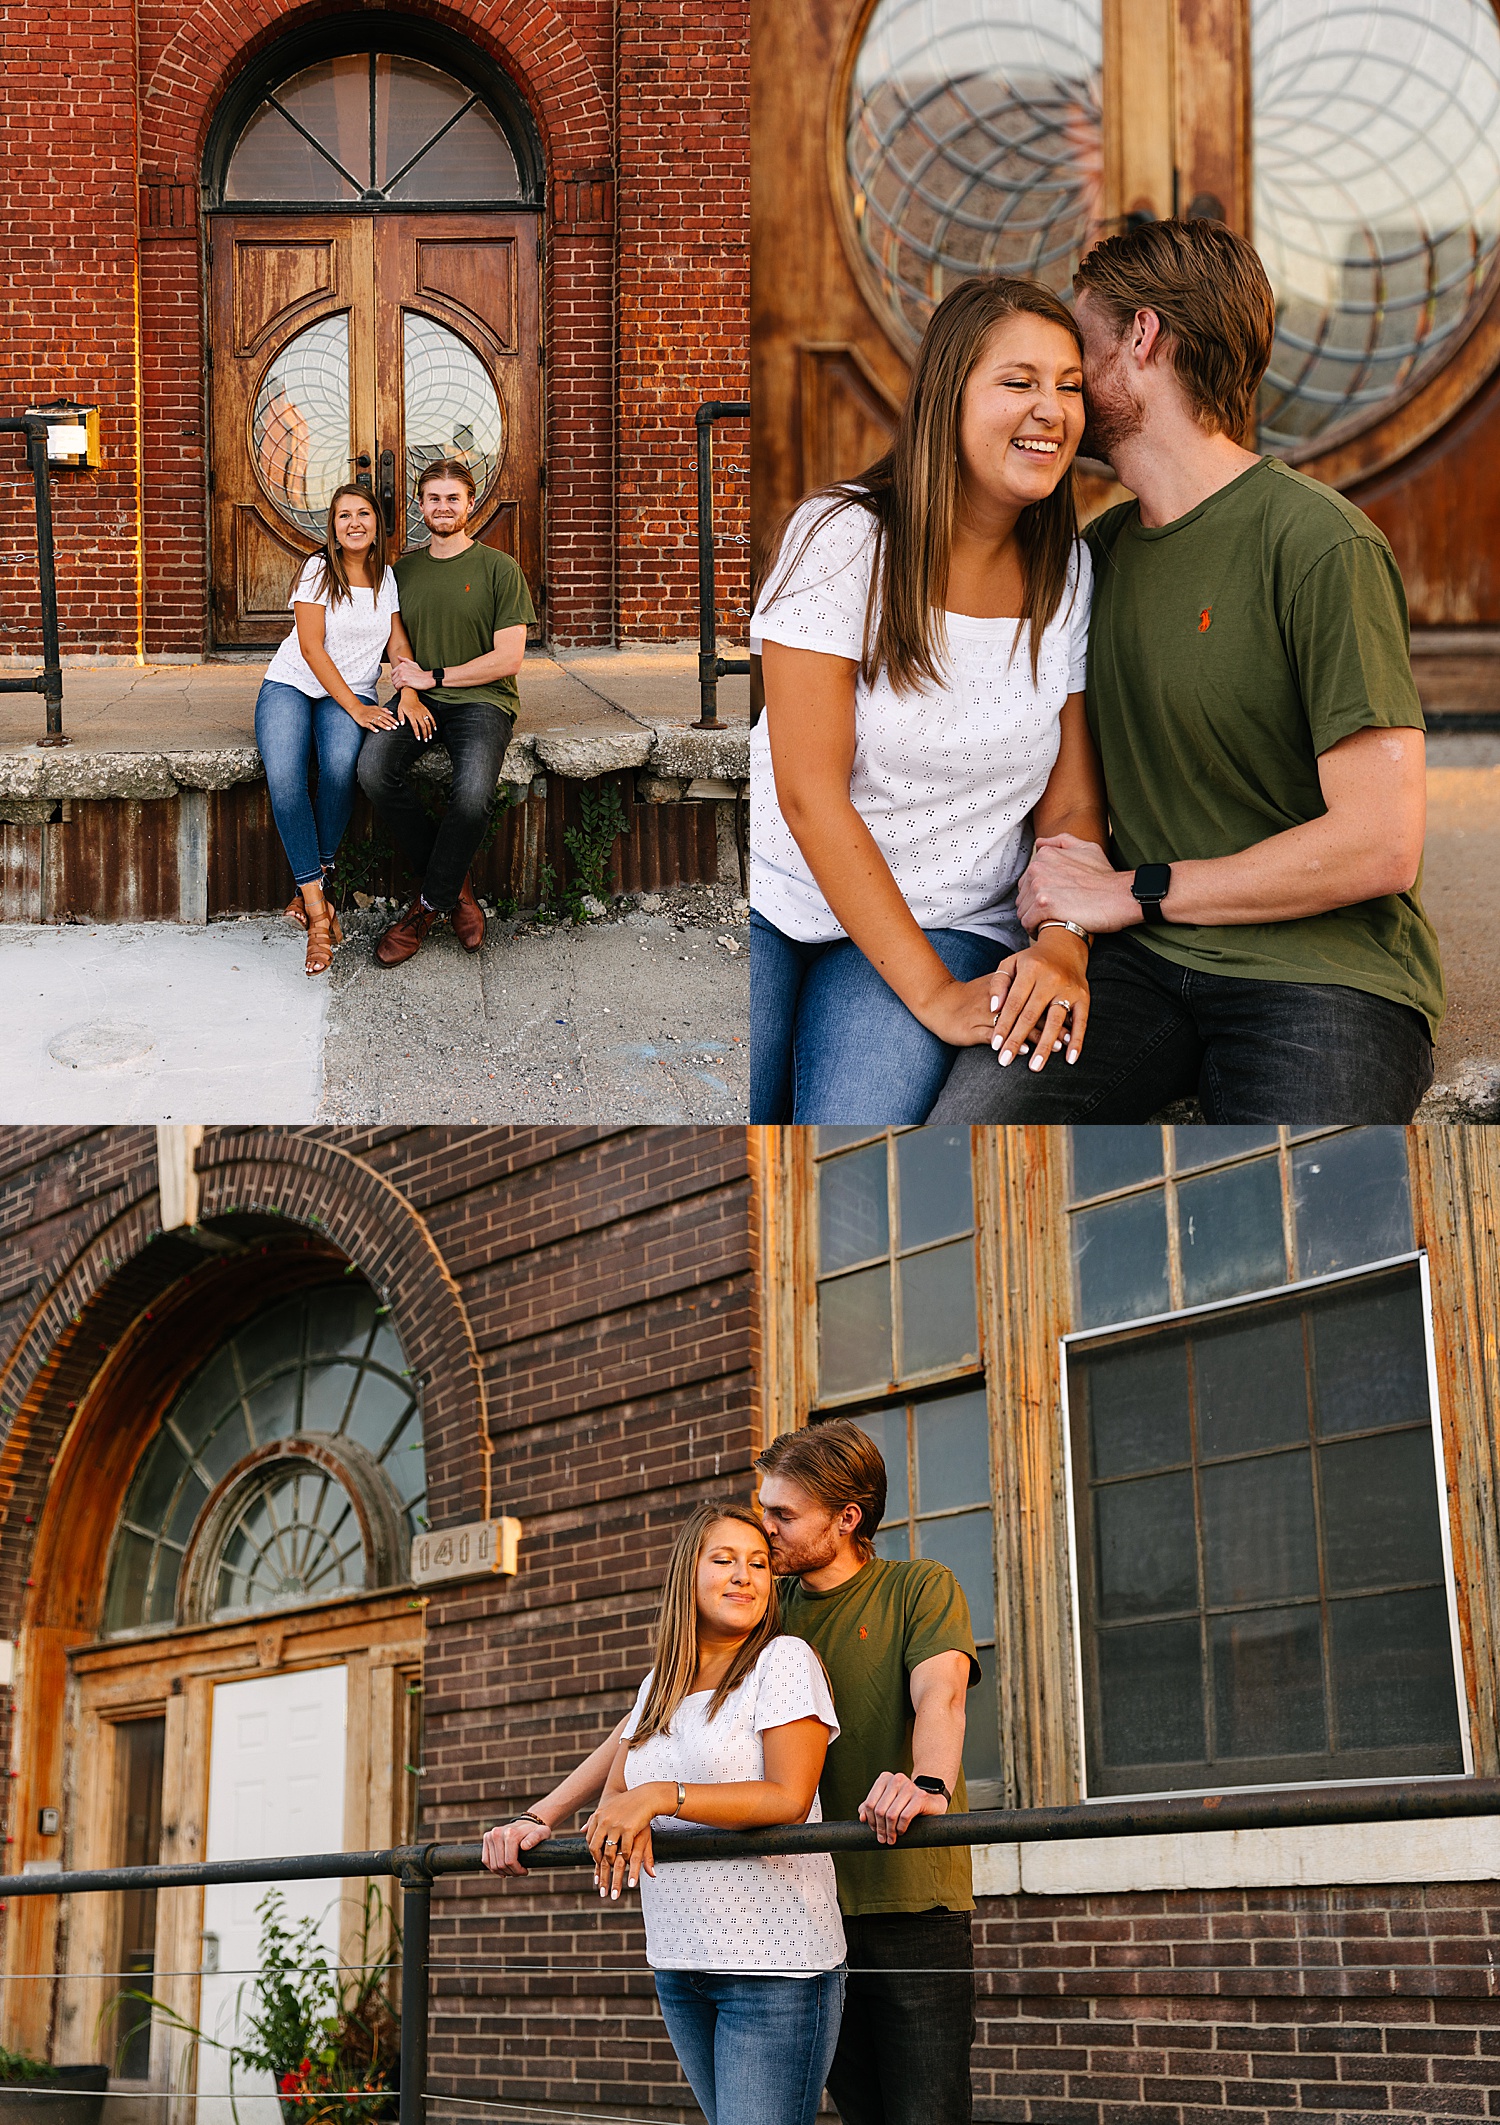 Kansas City summer engagement session with men and woman wearing street clothes